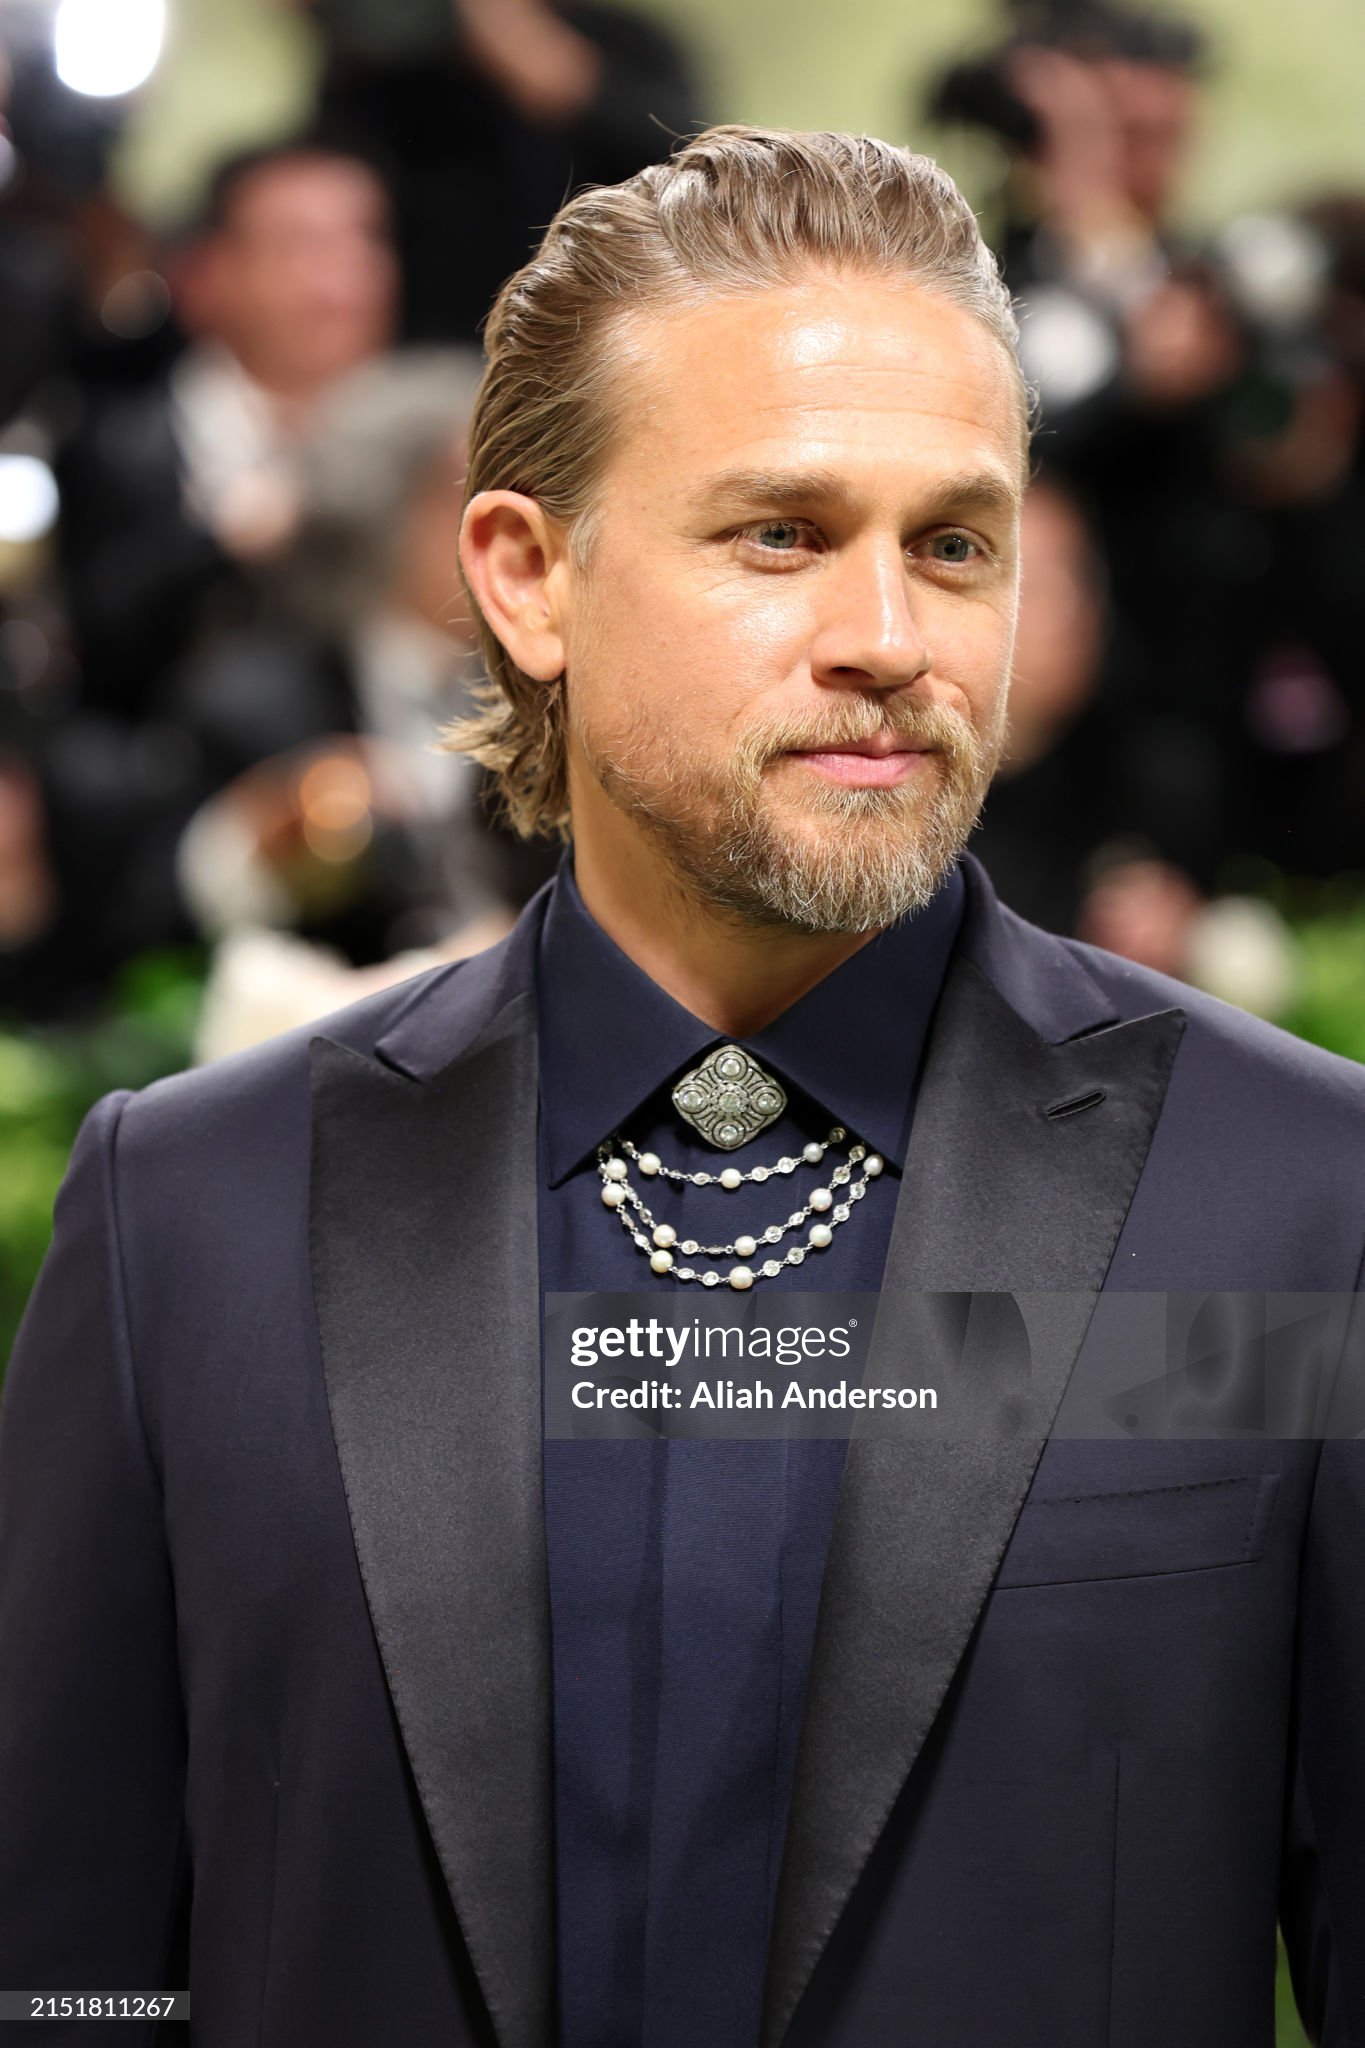 gettyimages-2151811267-2048x2048.jpg